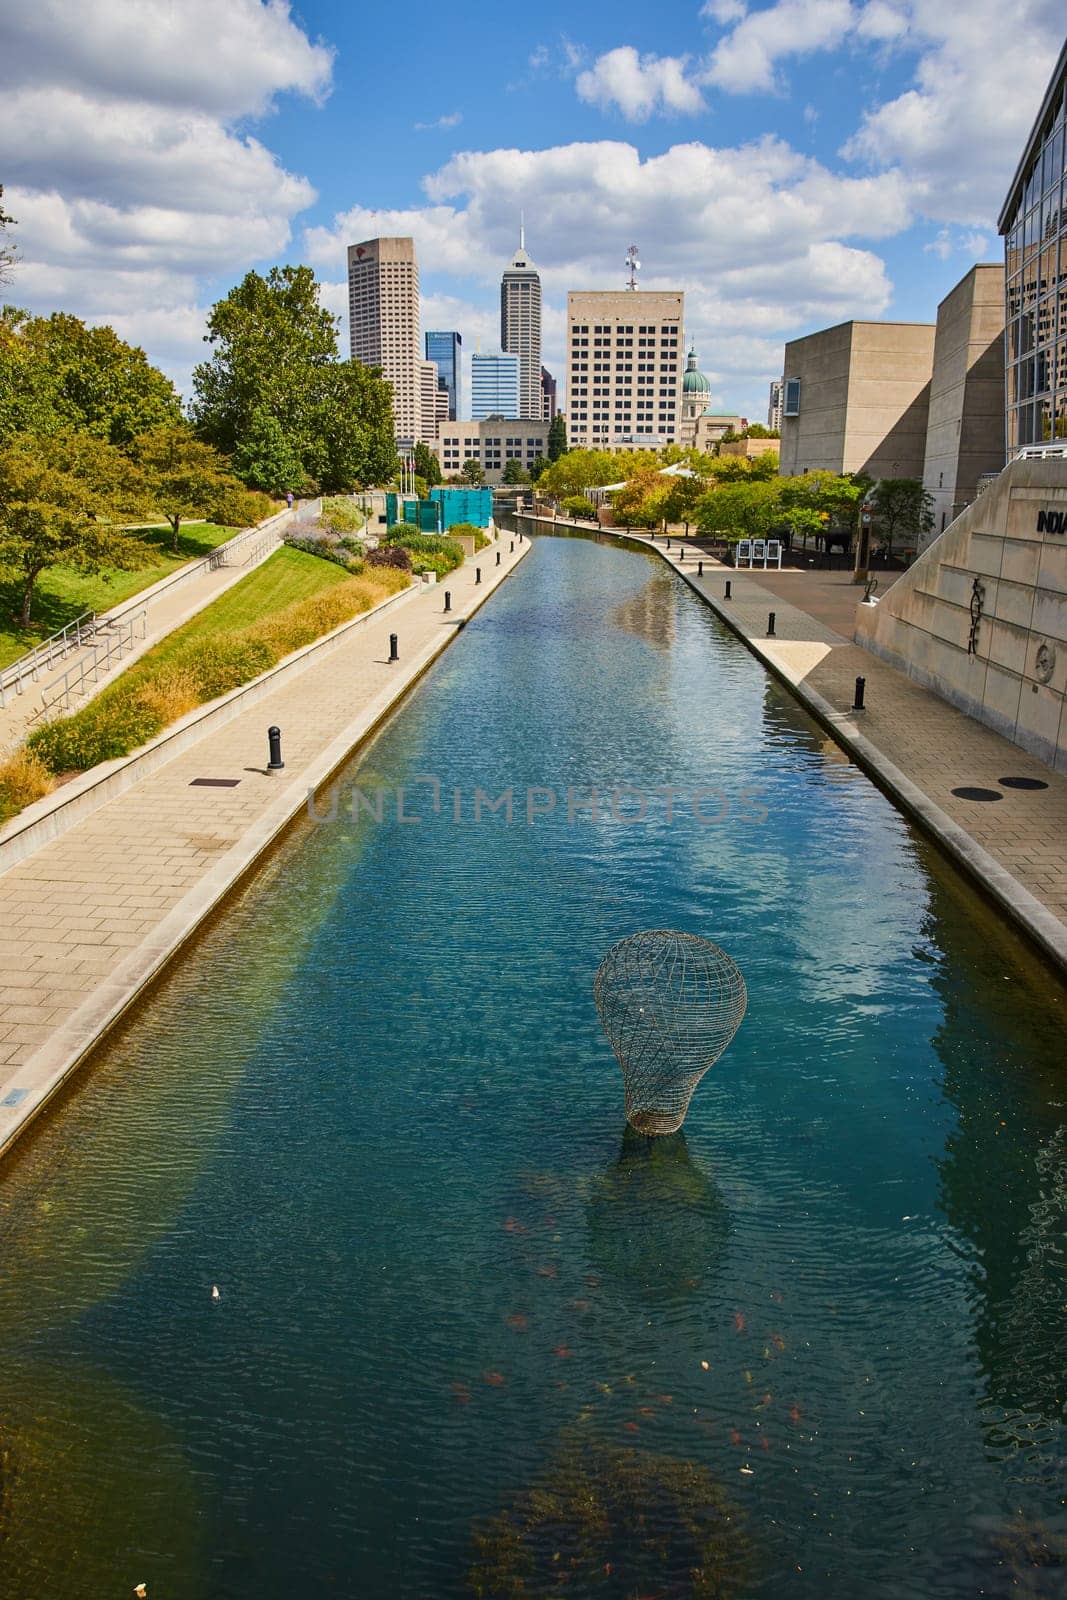 Urban Canal with Art Sculpture and Indianapolis Skyline by njproductions